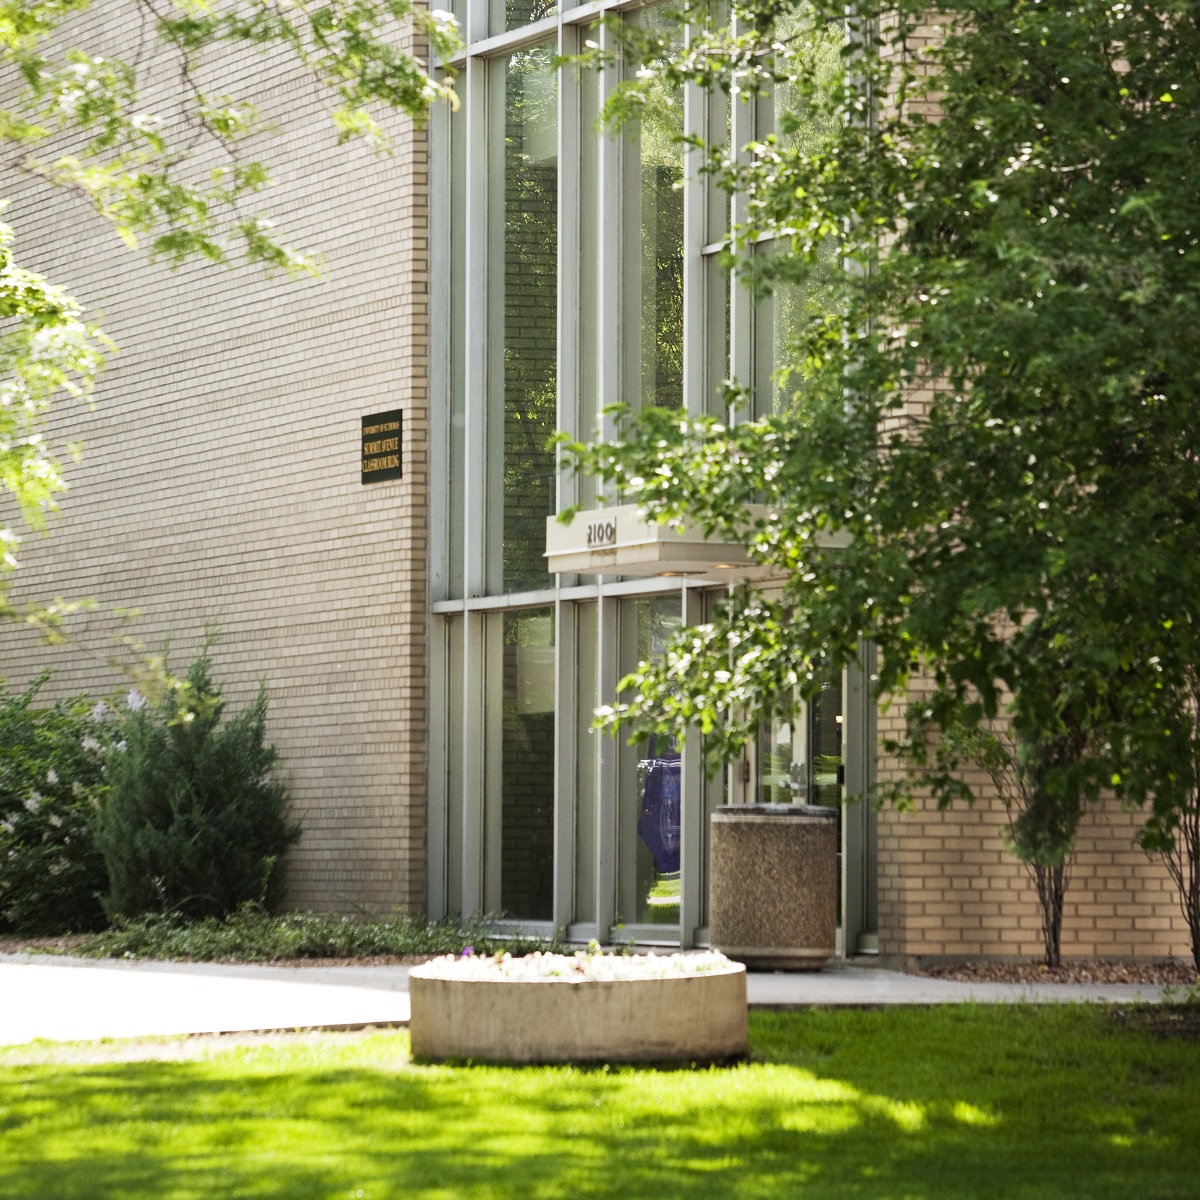 Exterior of the Summit Classroom Building